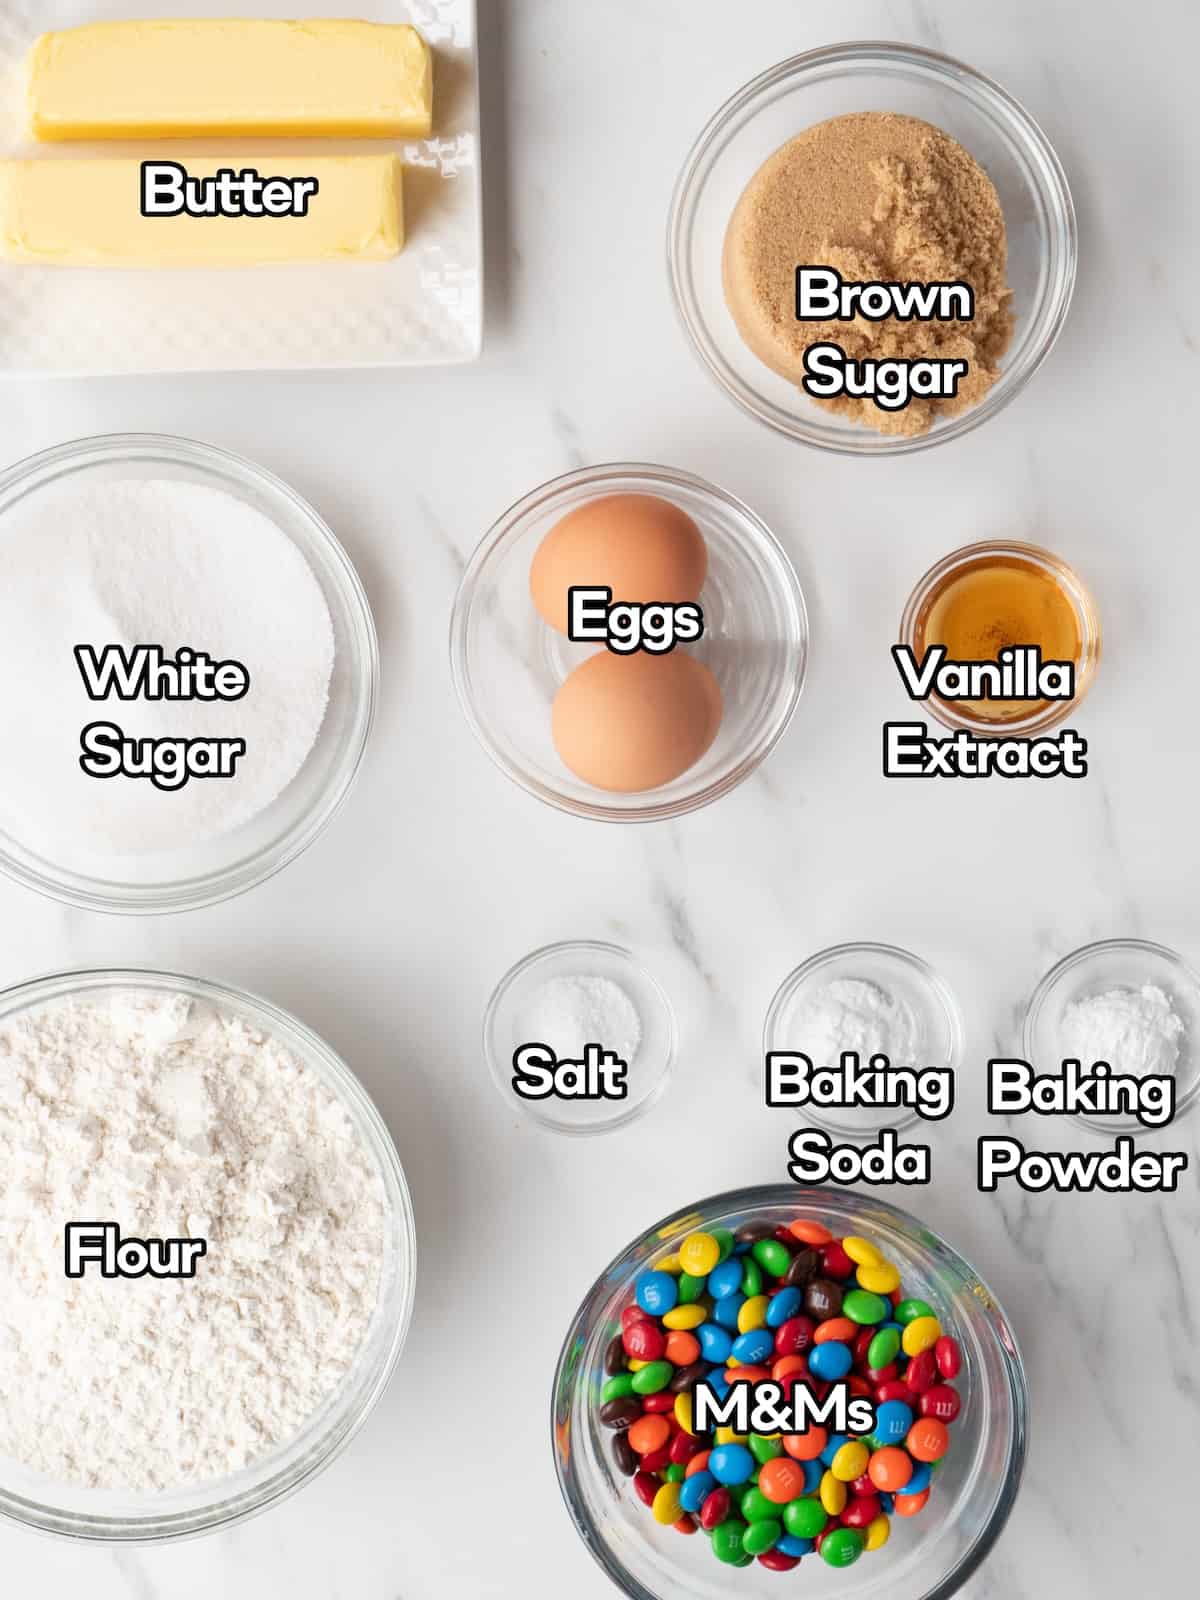 Mise en place of all the ingredients for making giant M&M cookies.